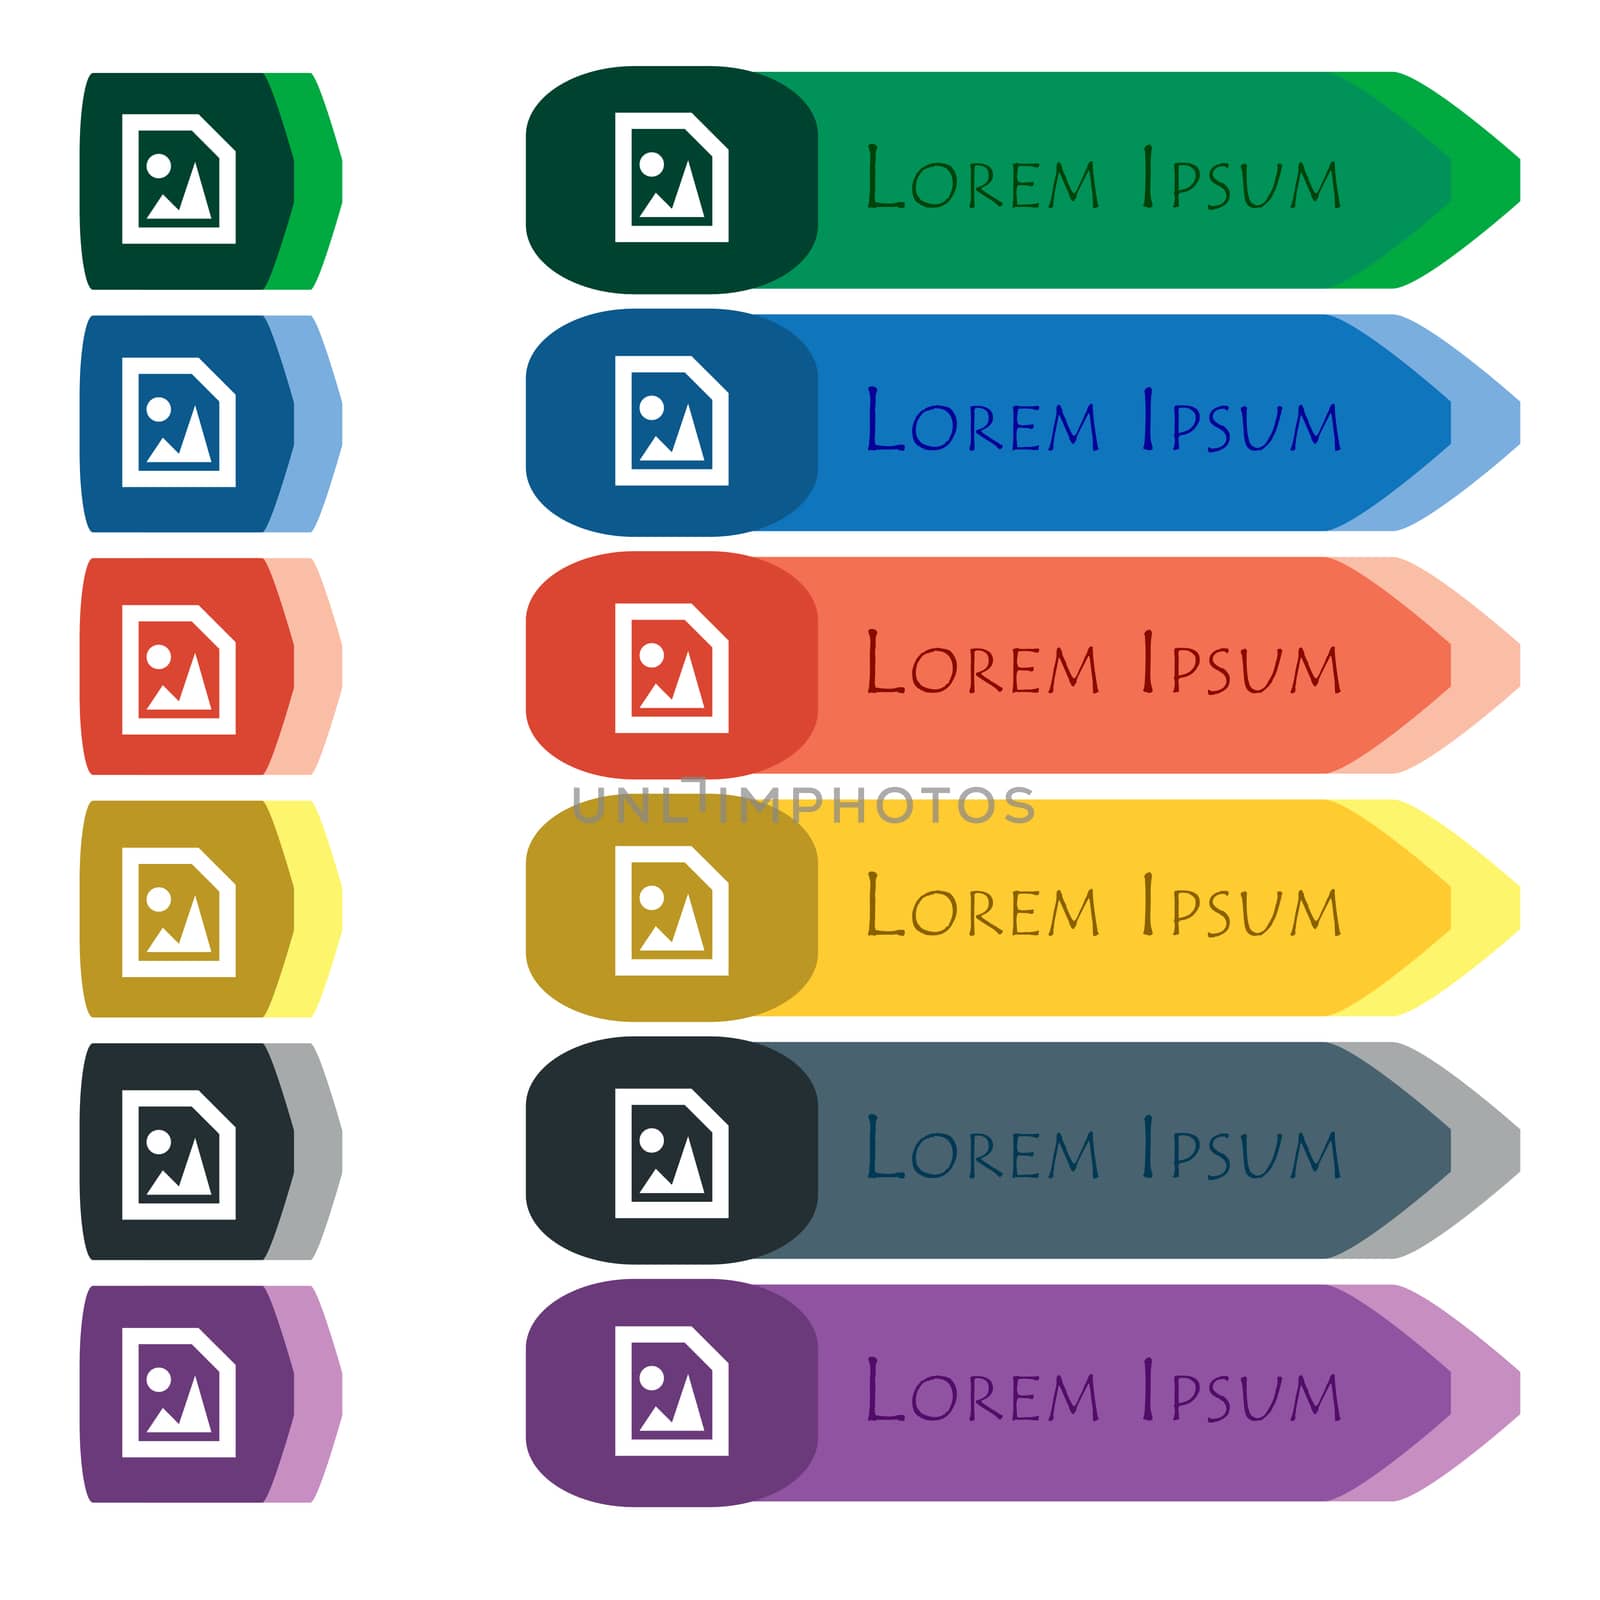 File JPG icon sign. Set of colorful, bright long buttons with additional small modules. Flat design. 